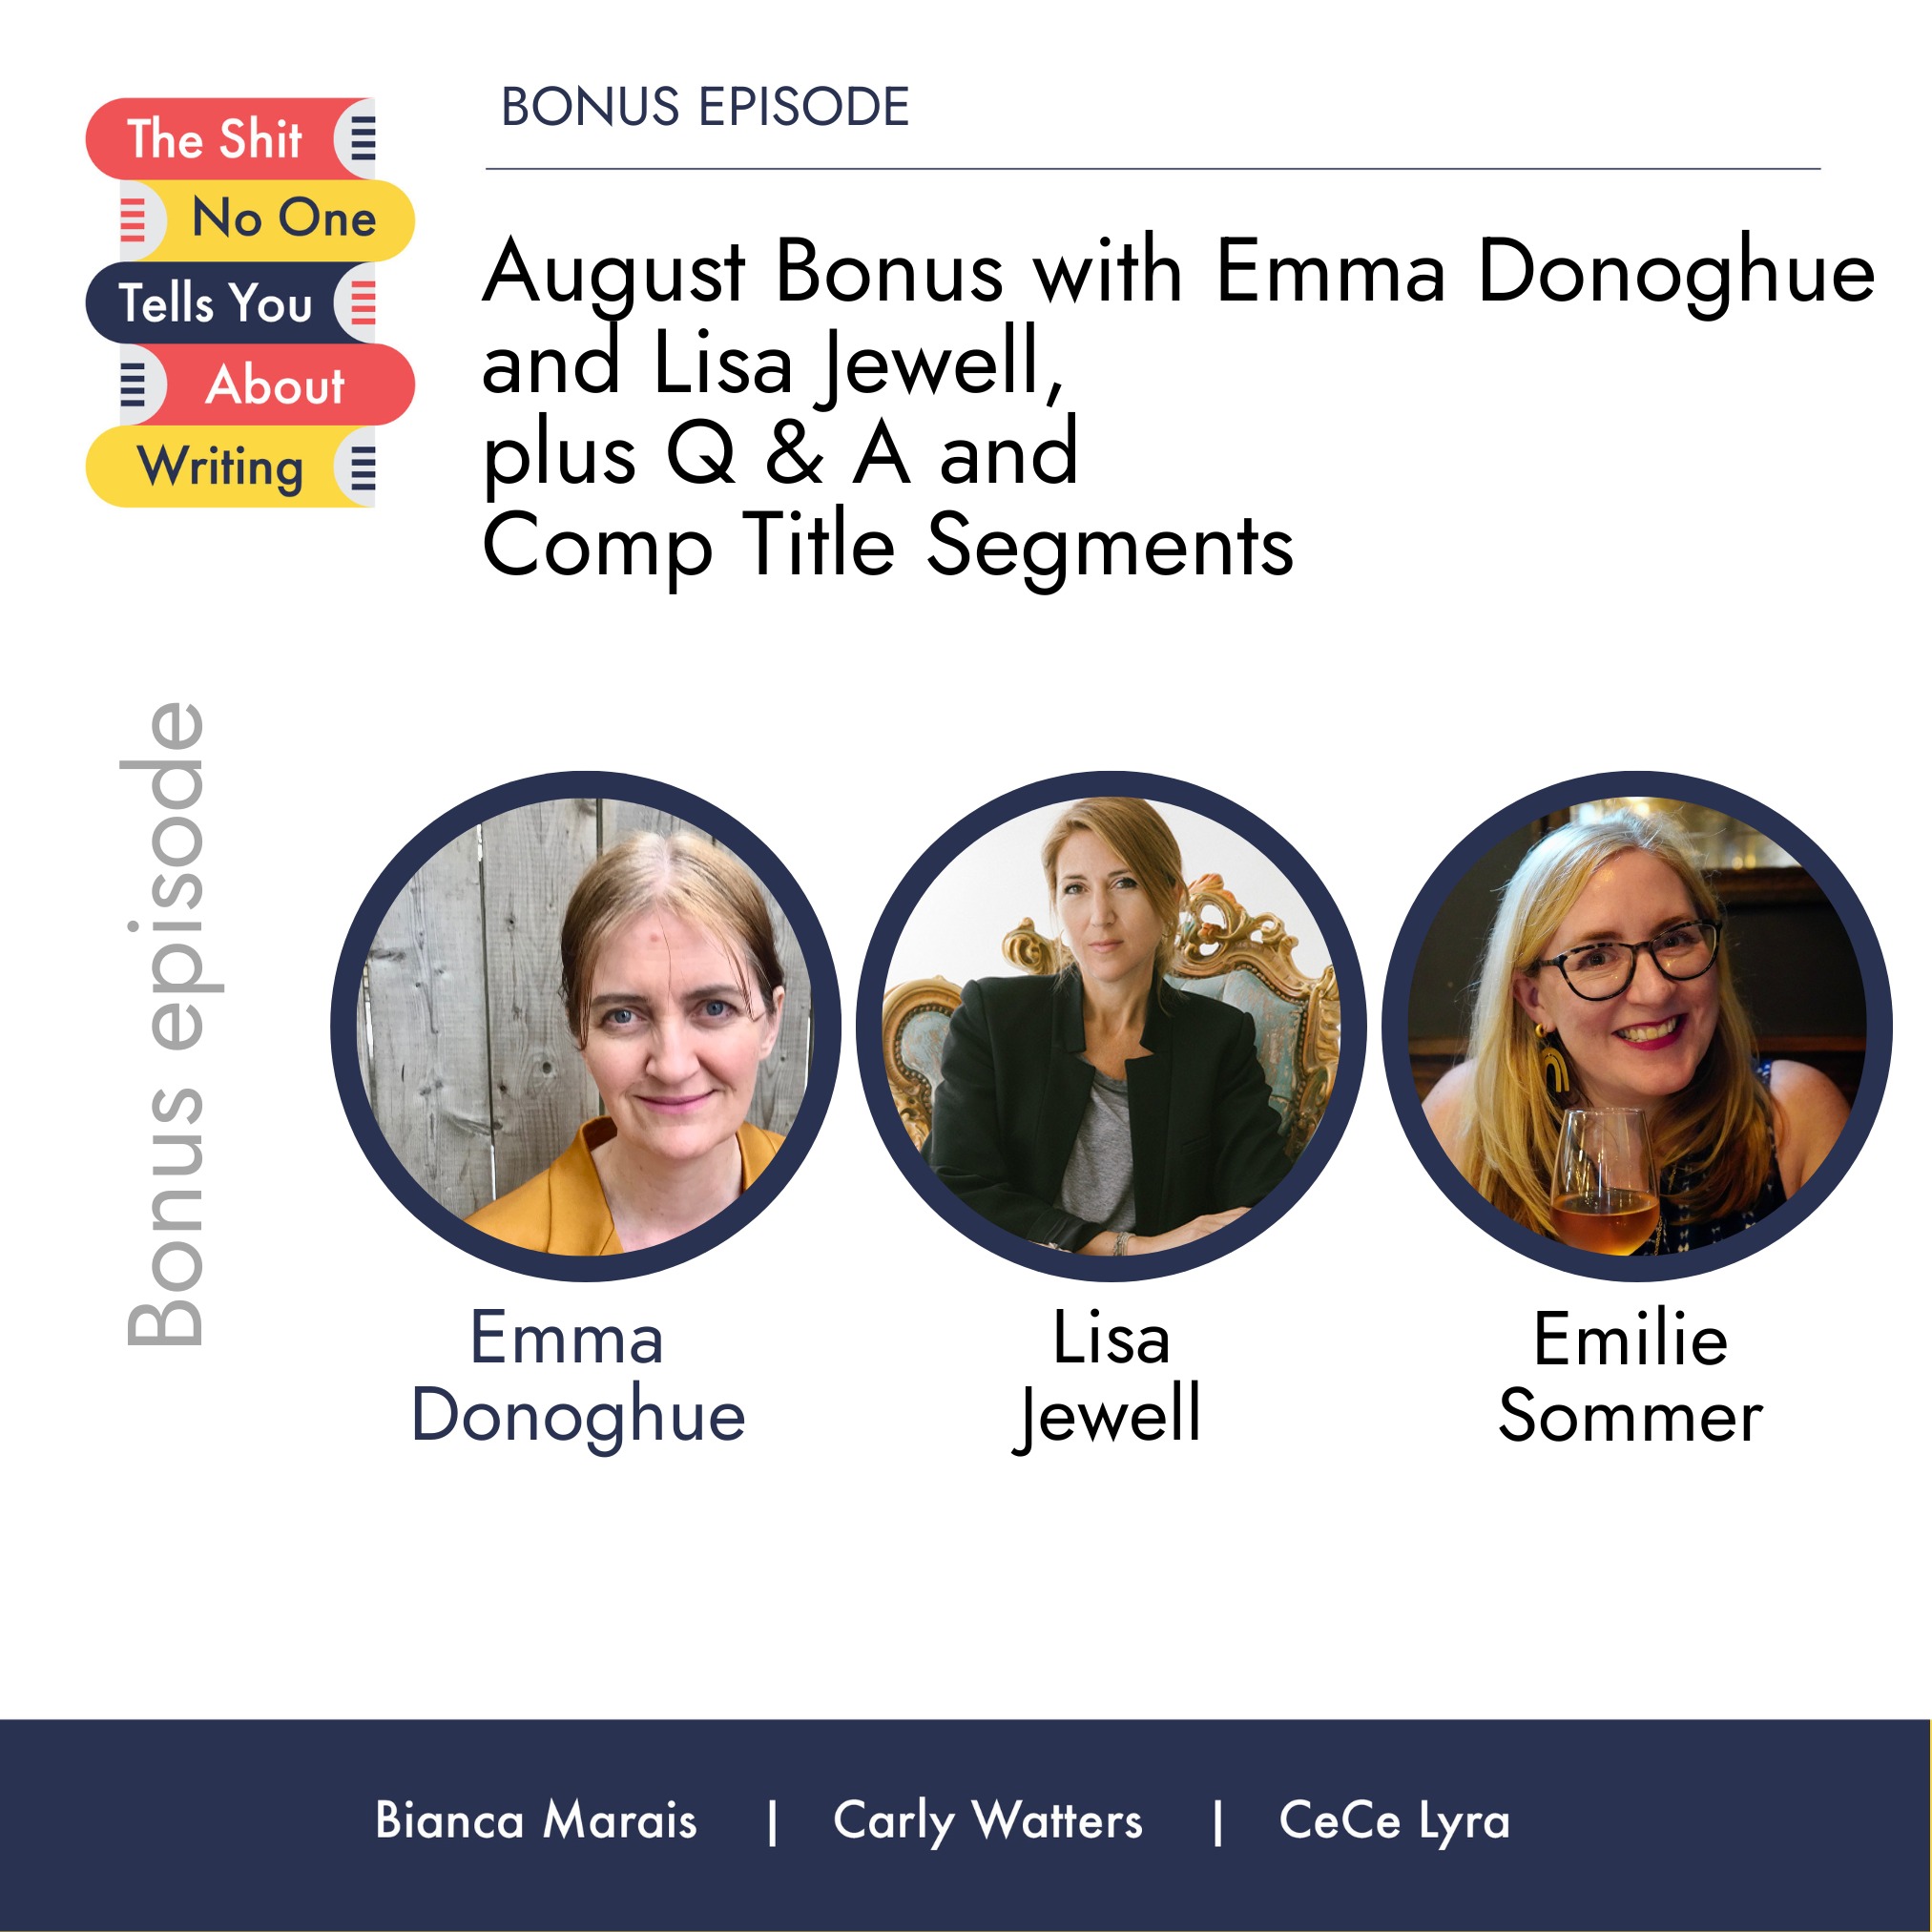 August Bonus with Emma Donoghue and Lisa Jewell, plus Q & A and Comp Title Segments